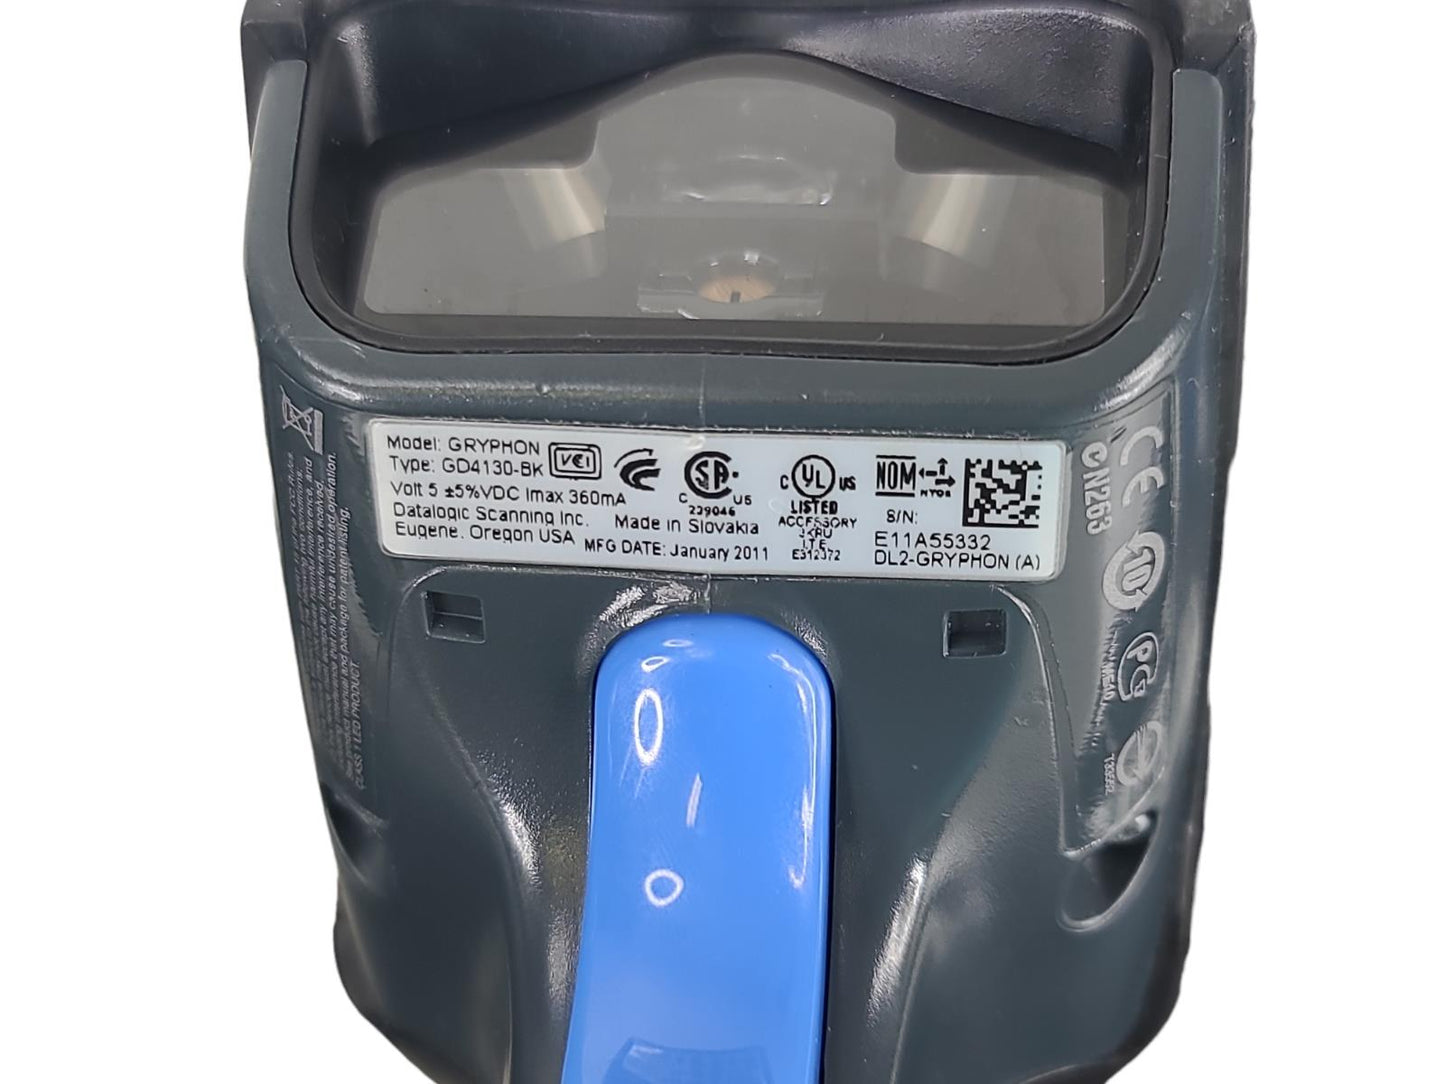 Lot of 6 Datalogic Gryphon GD4130-BK USB Wired Handheld Barcode Scanner-For part